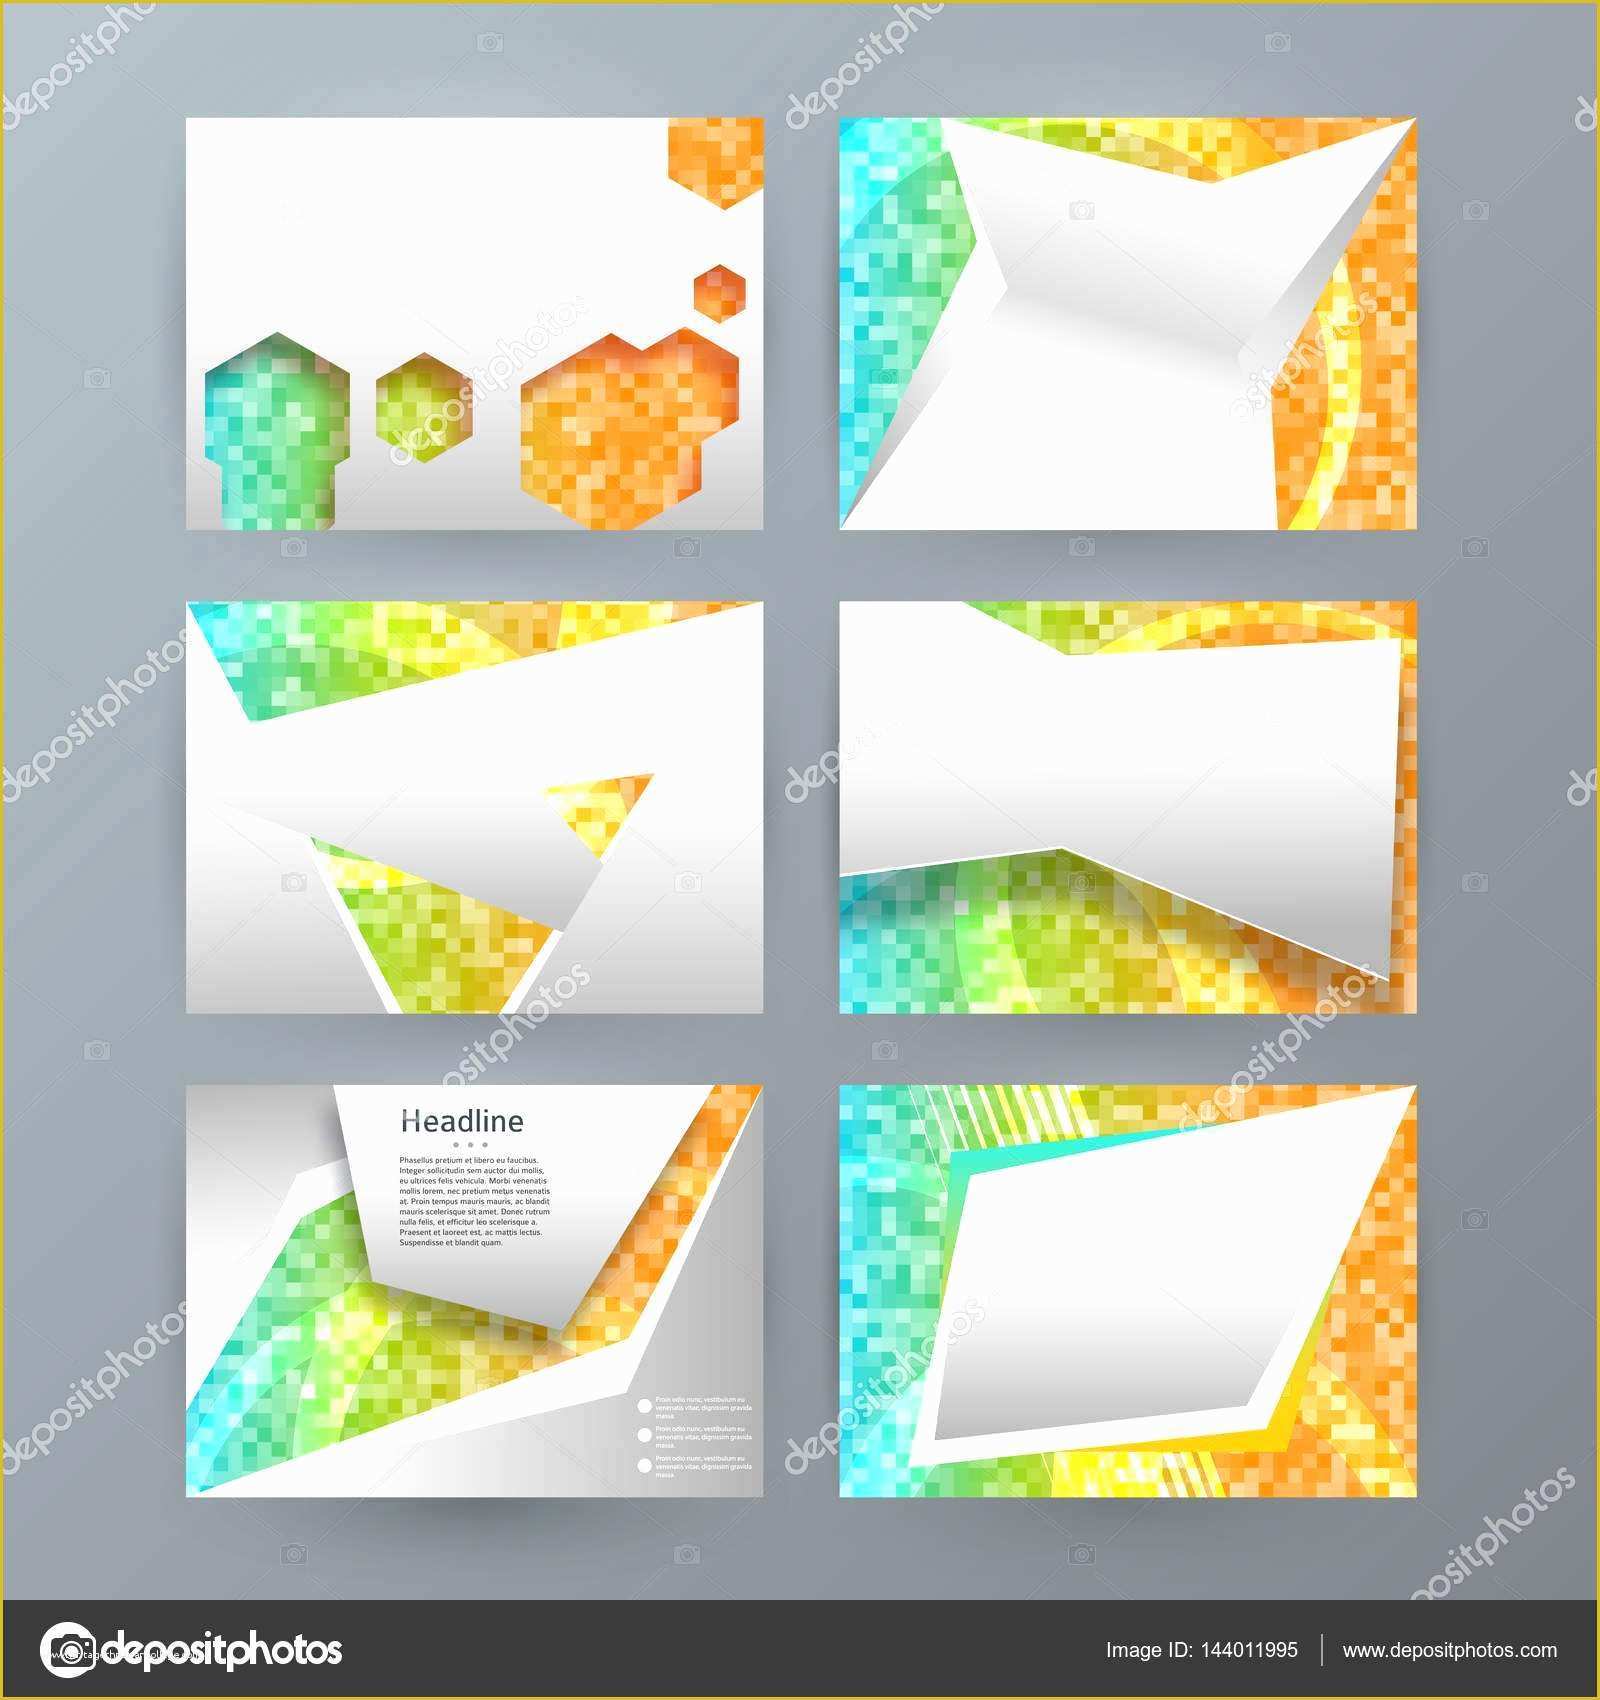 Free Tri Fold Brochure Template Powerpoint Of Powerpoint Brochure Templates Limited Free Tri Fold